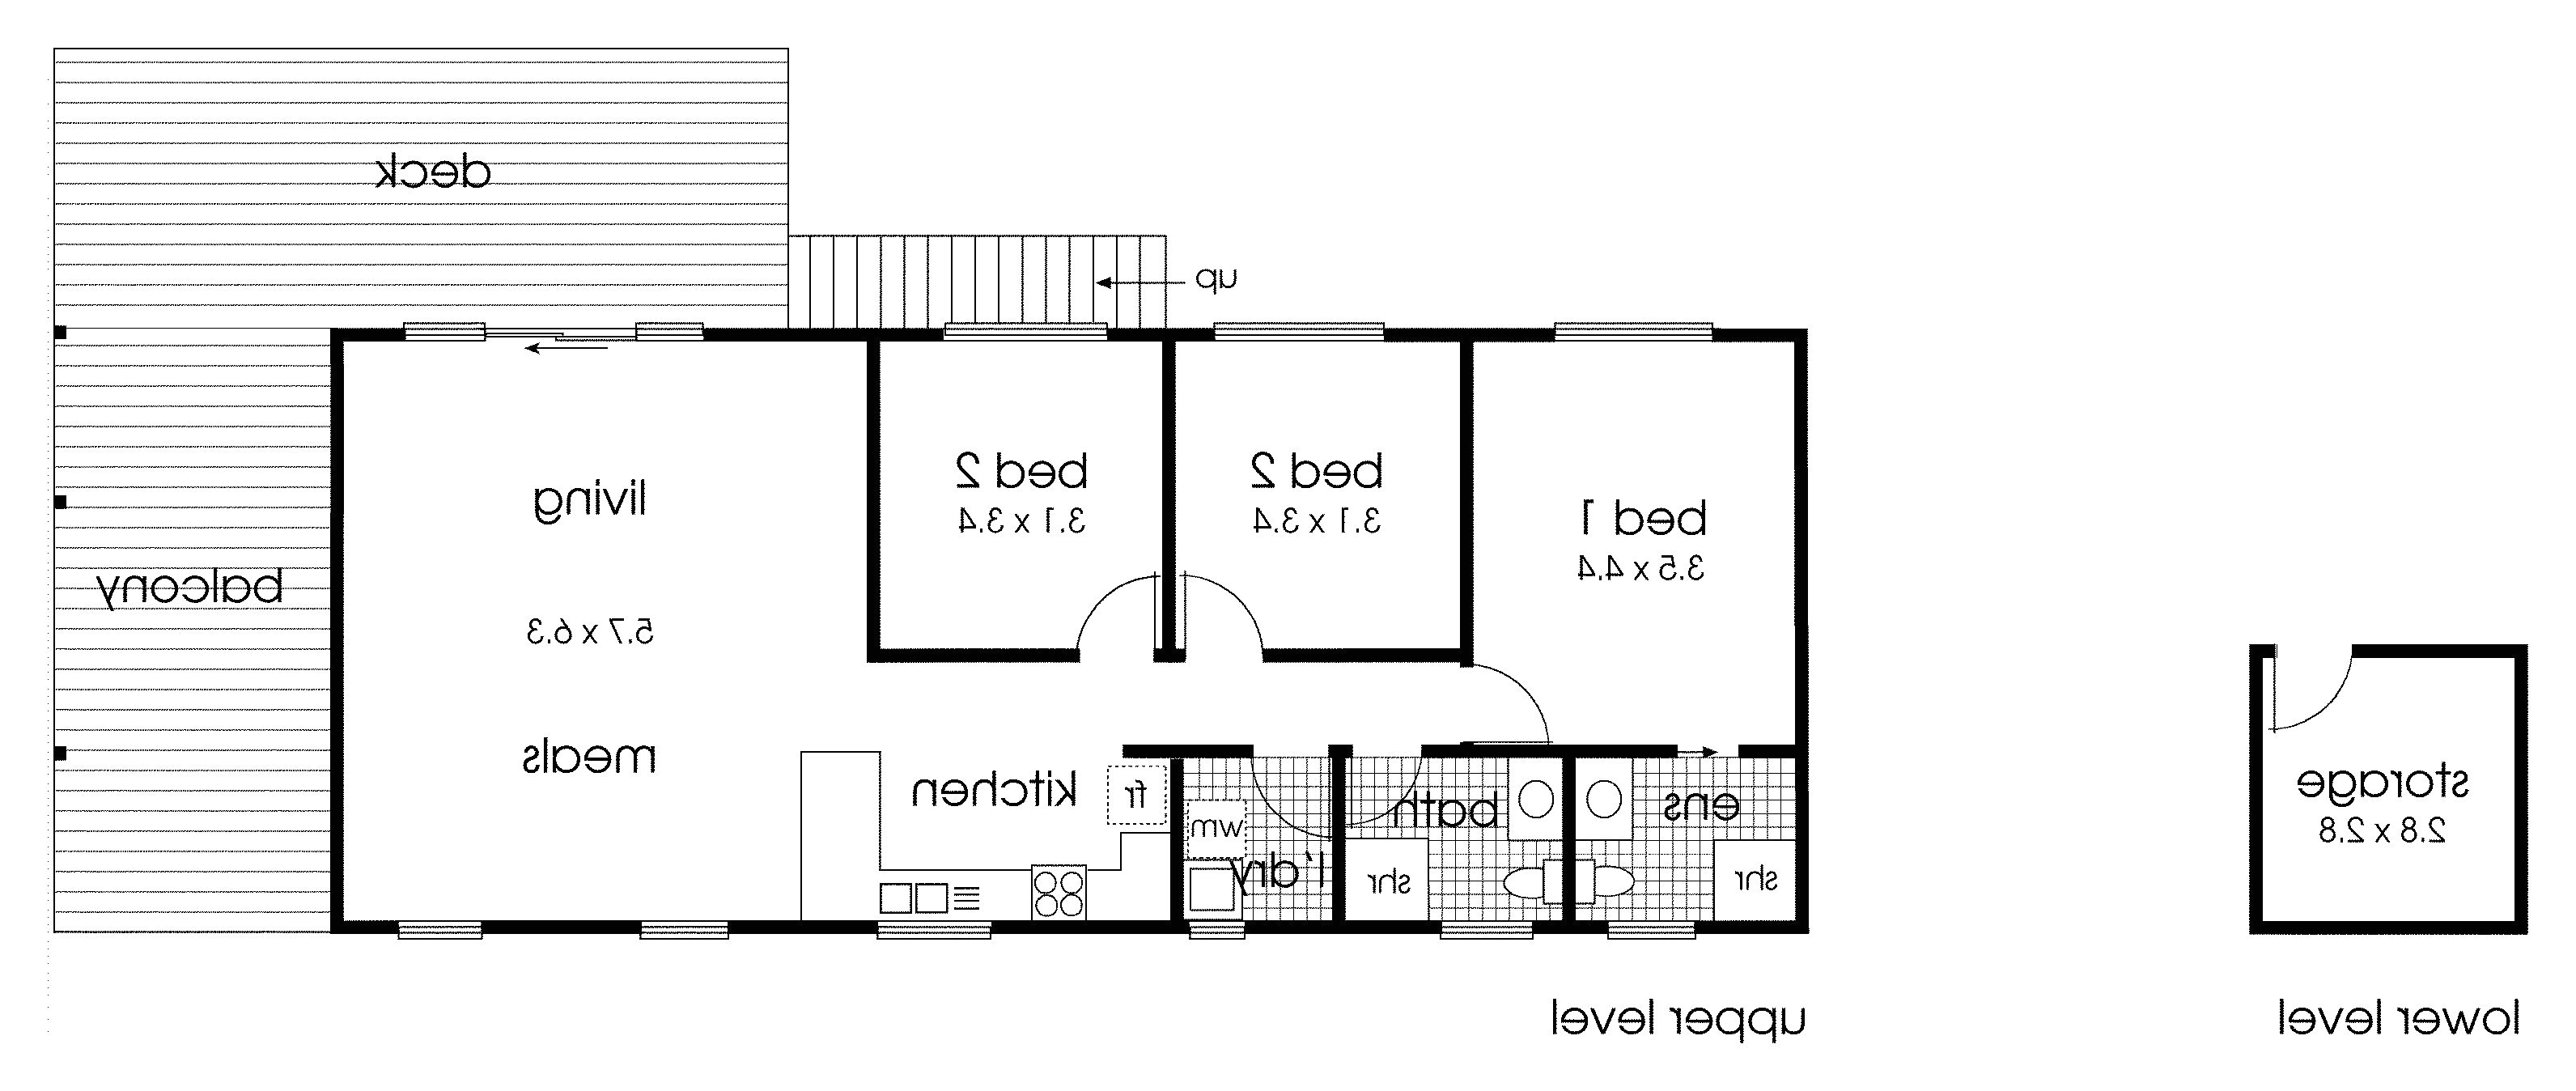 floor plans small homes luxury floor plans for small bedrooms fresh 8 bedroom house plans new